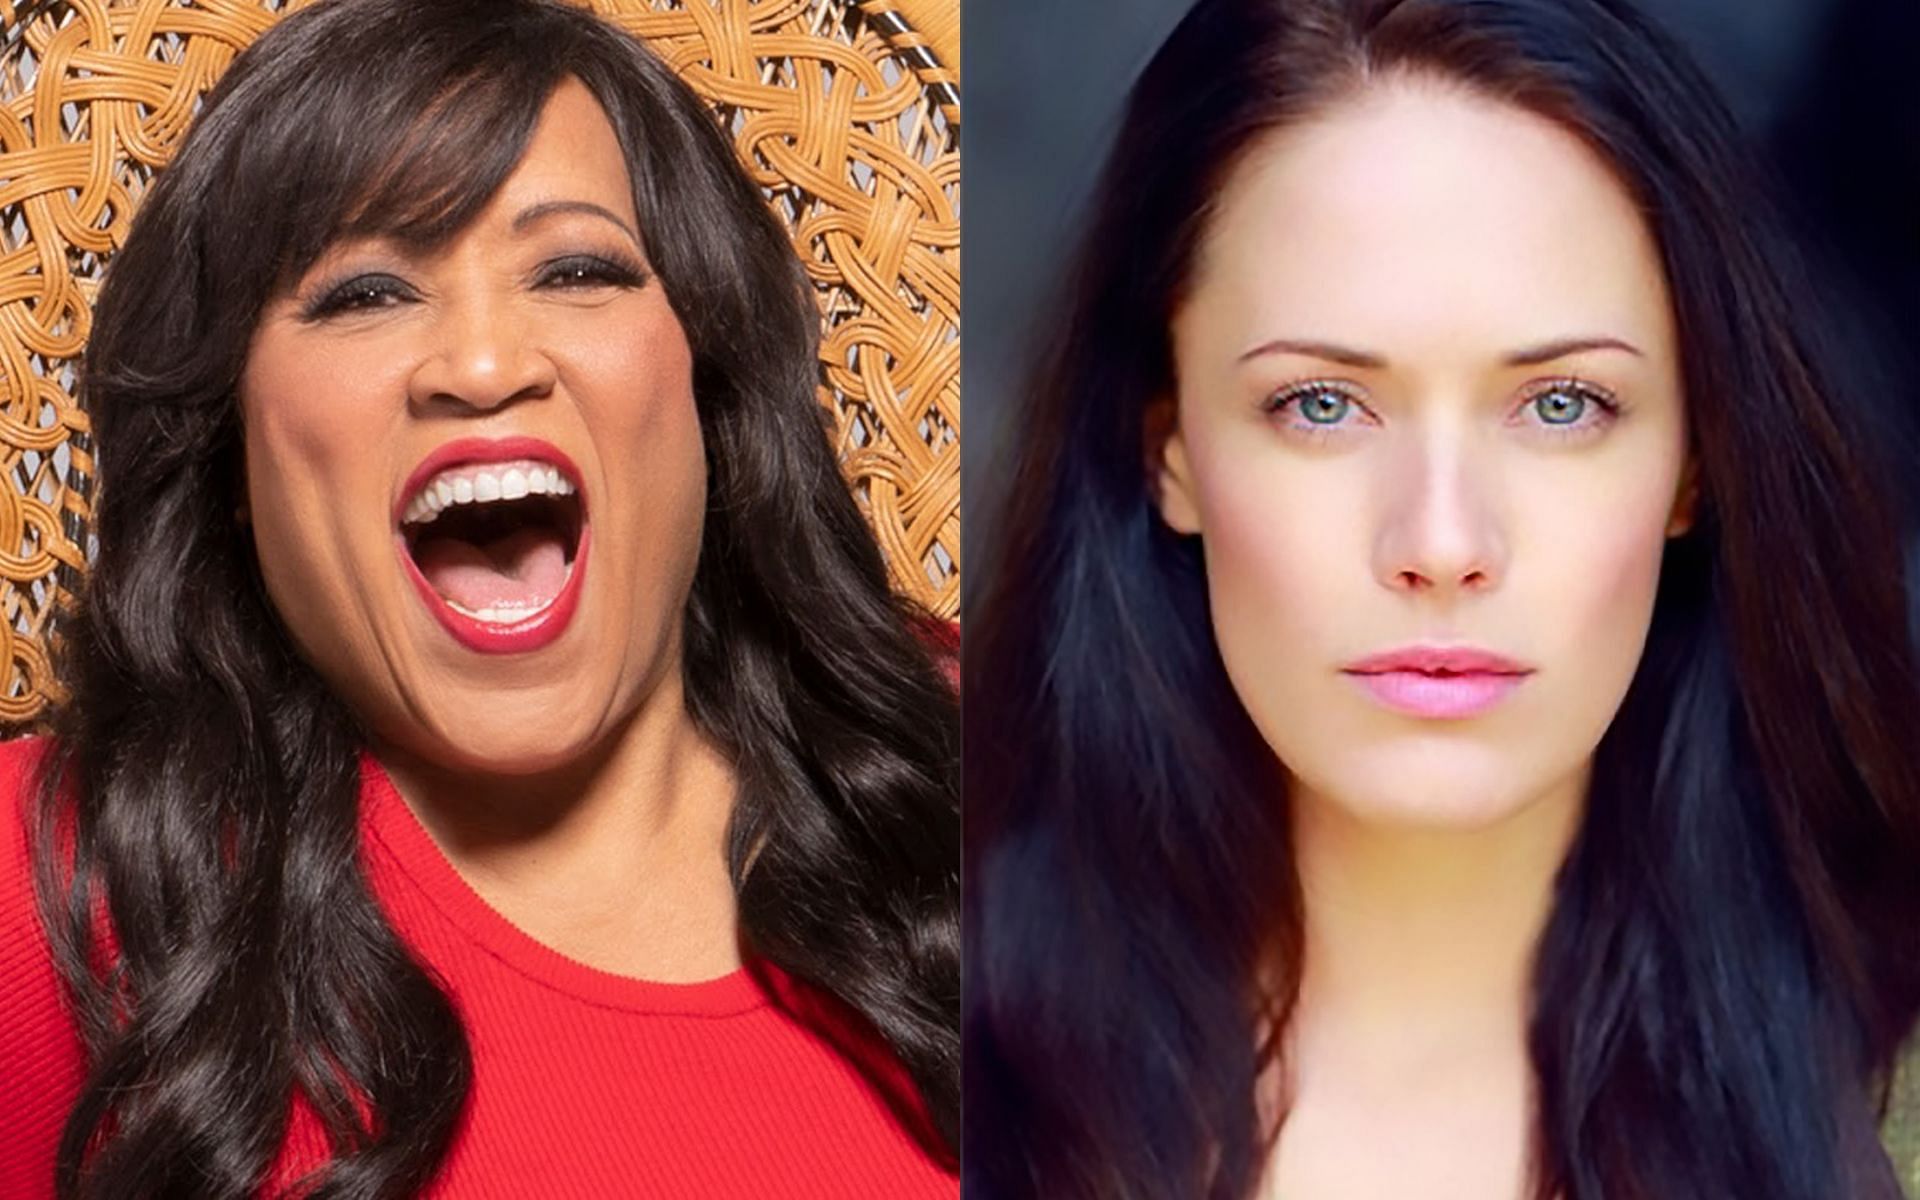 Jackee Harry and Sarah Armstrong stars in Killer Design (Images via @JackeeHarry/Twitter and @Armstrong_10/Twitter)